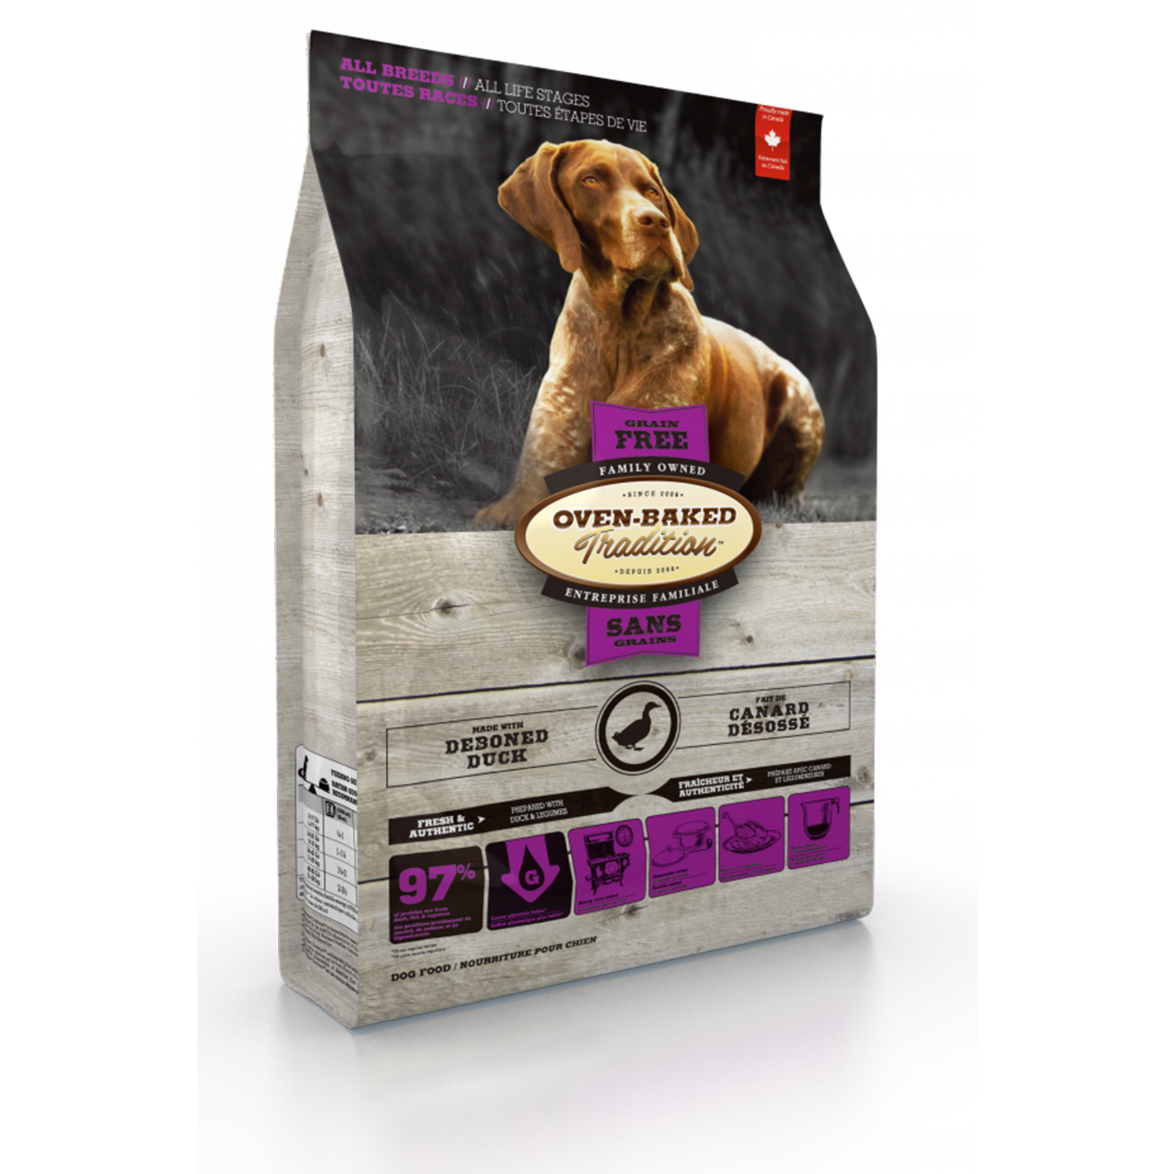 Oven Baked Tradition Grain-Free Adult Duck Dog Food